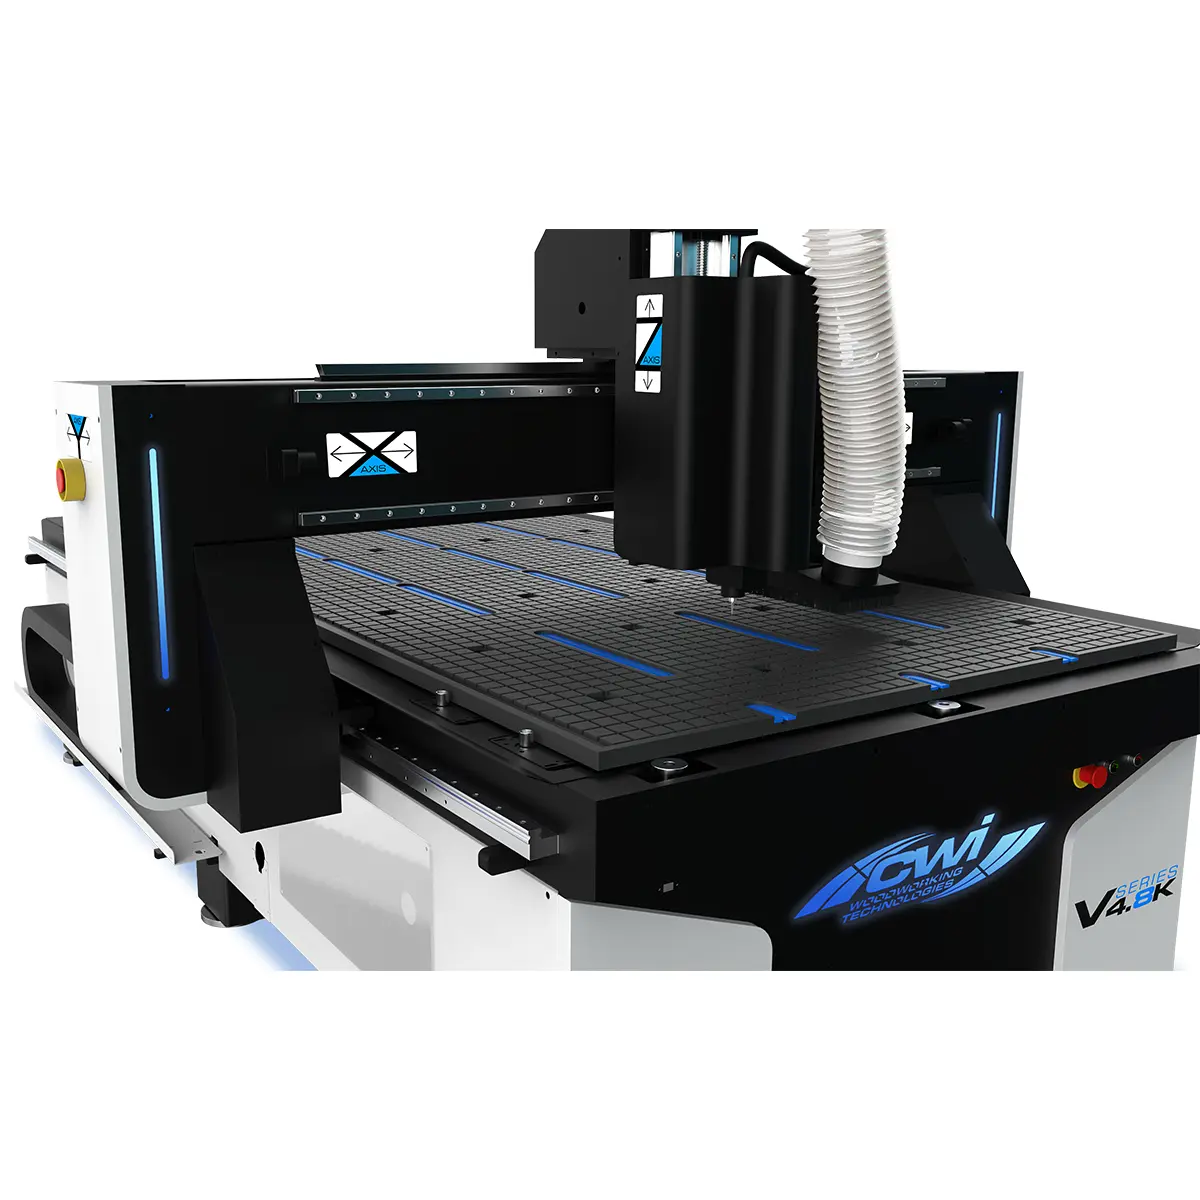 SignMeister V4.8-K CNC Router for Sign Making with Oscillating Knife System